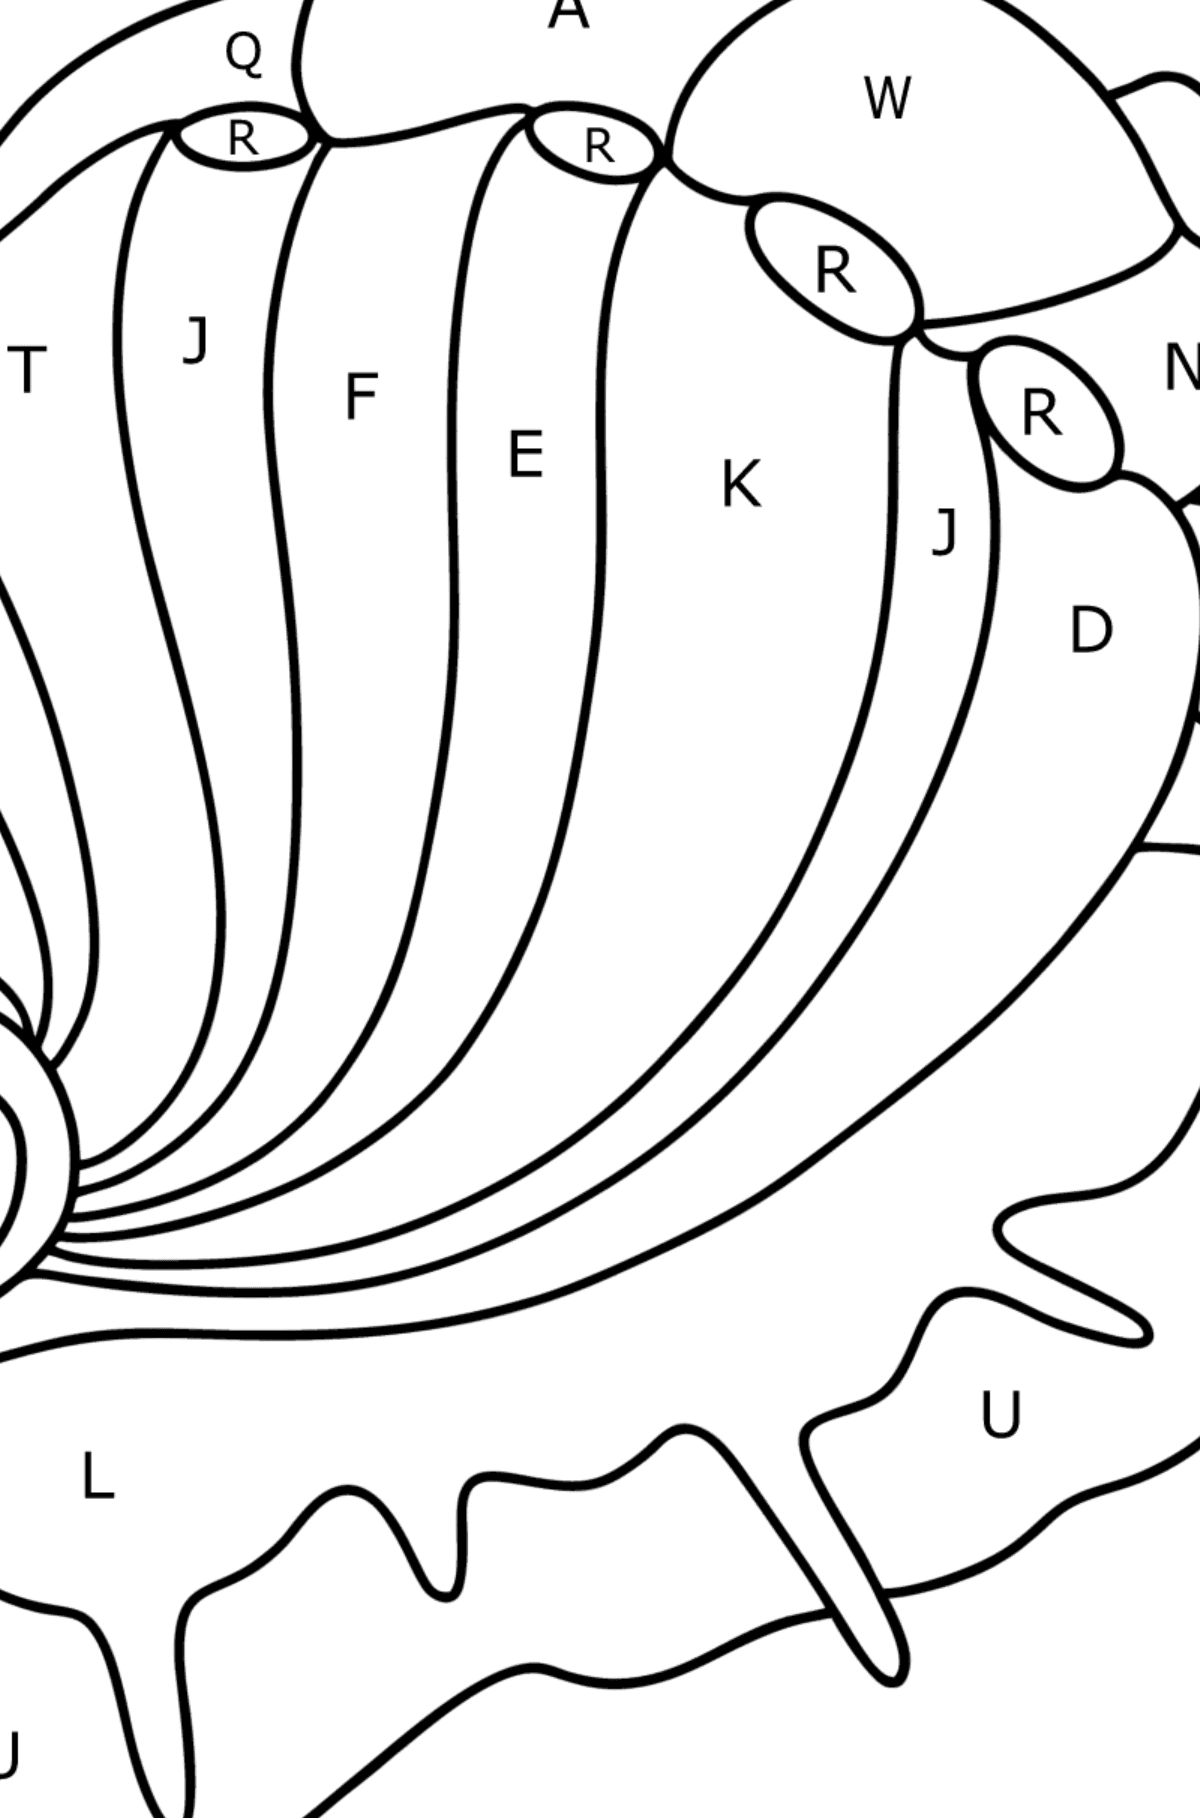 Mollusk abalone coloring page - Coloring by Letters for Kids